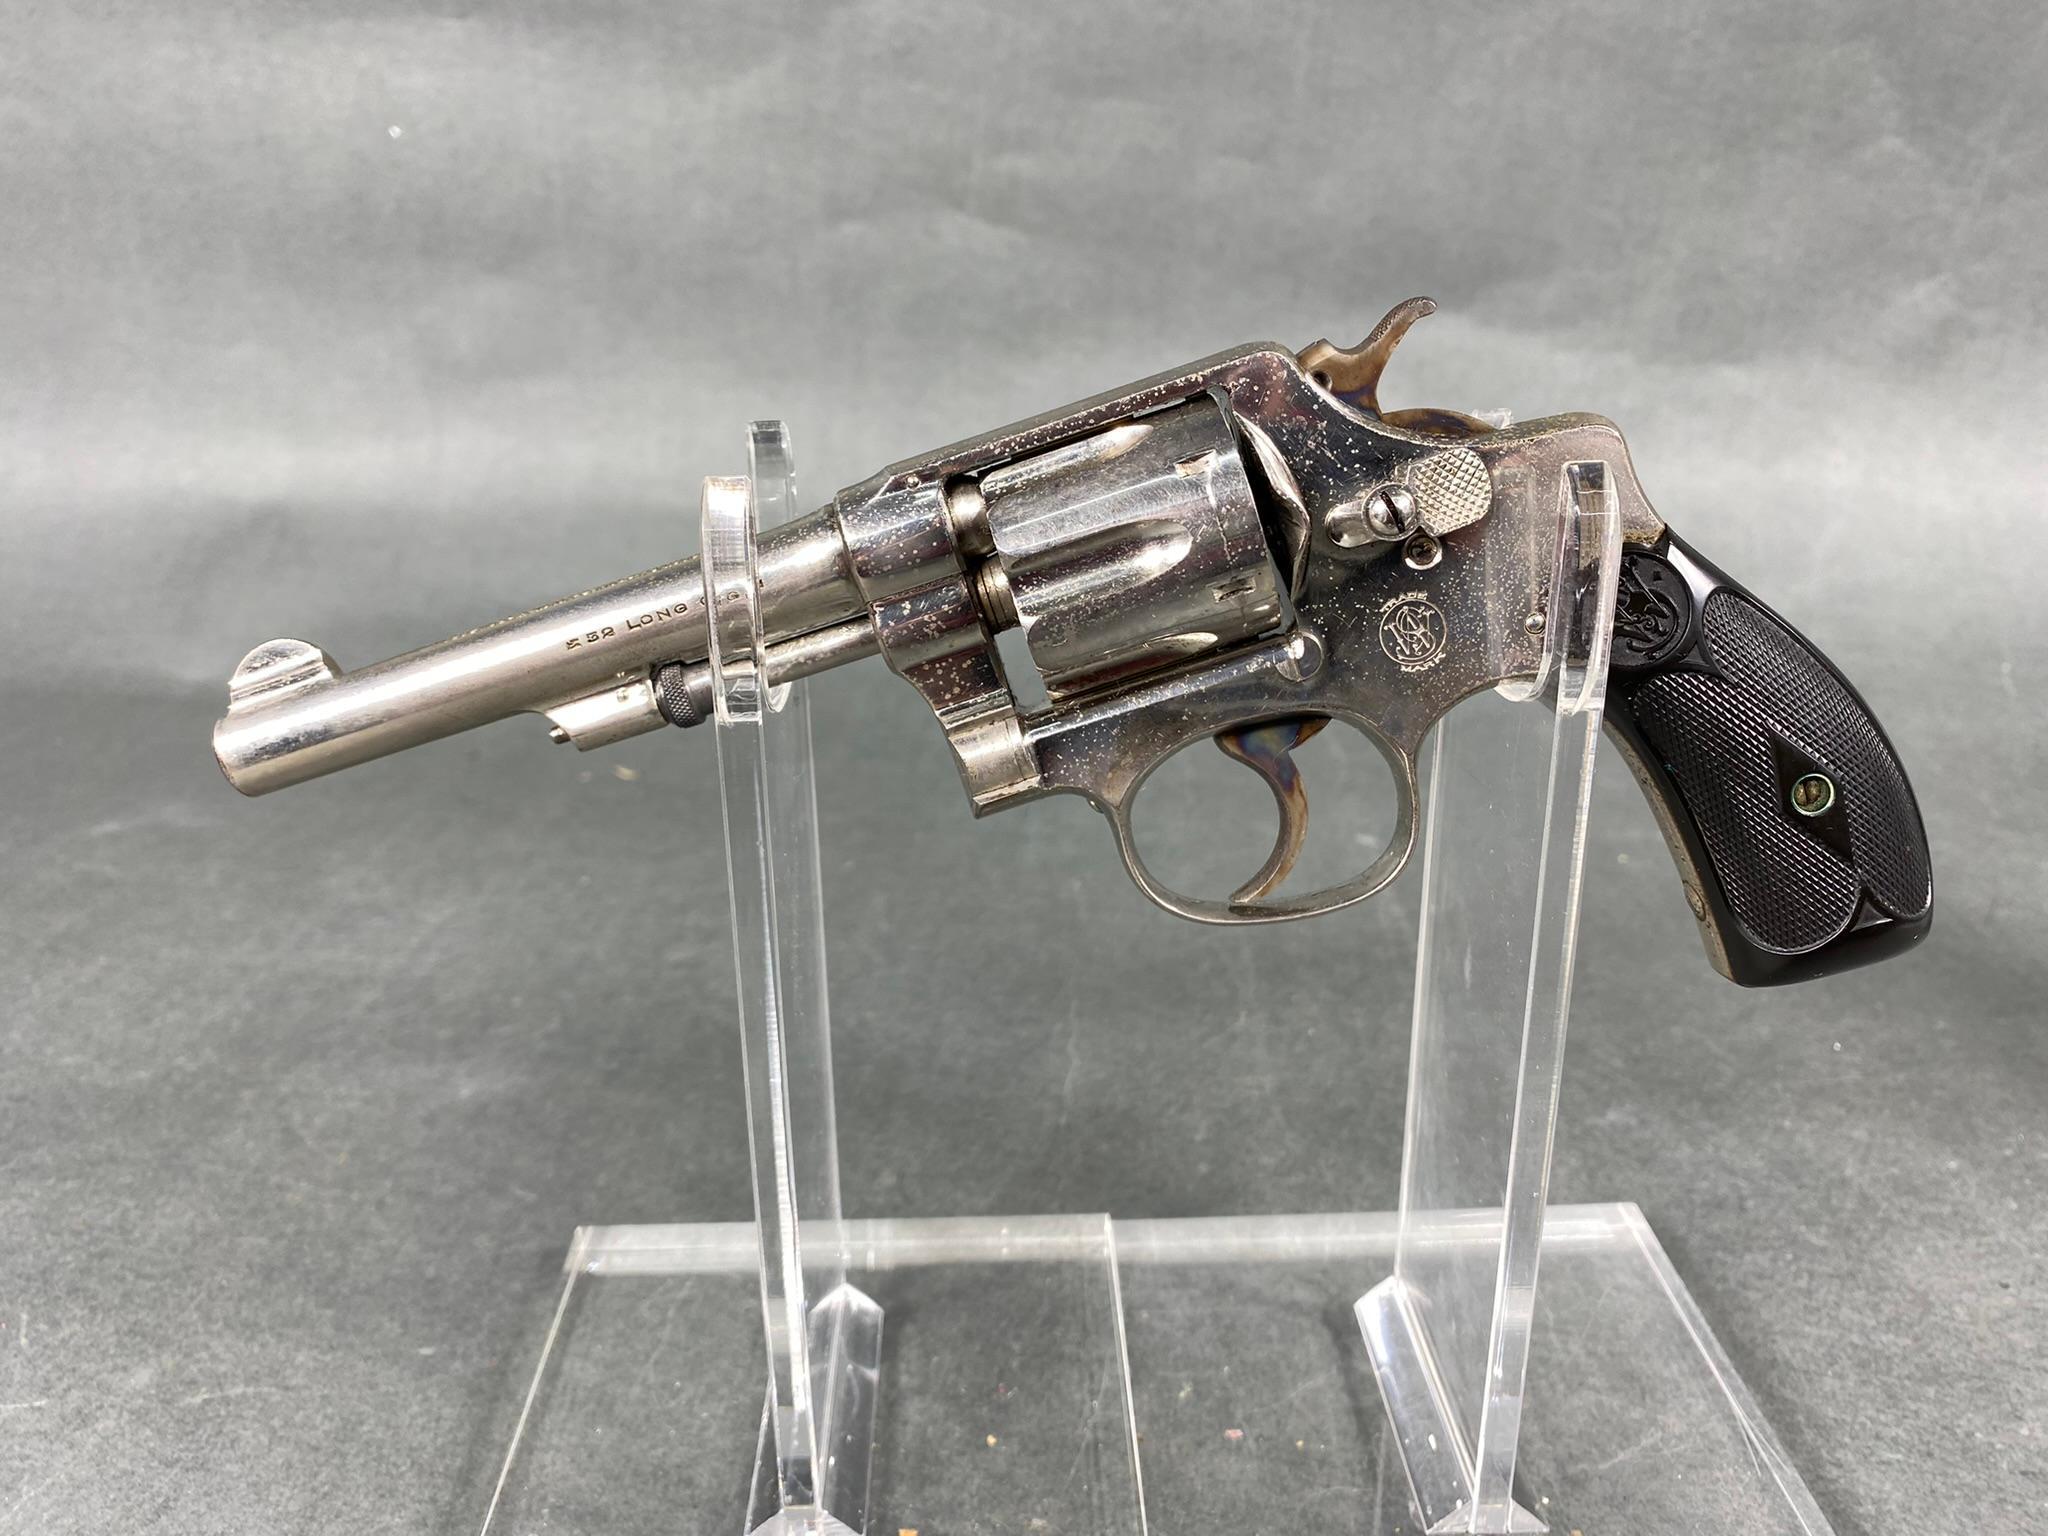 Smith & Wesson Model 32 Hand Ejector 1903 Second Chance Revolver Nice